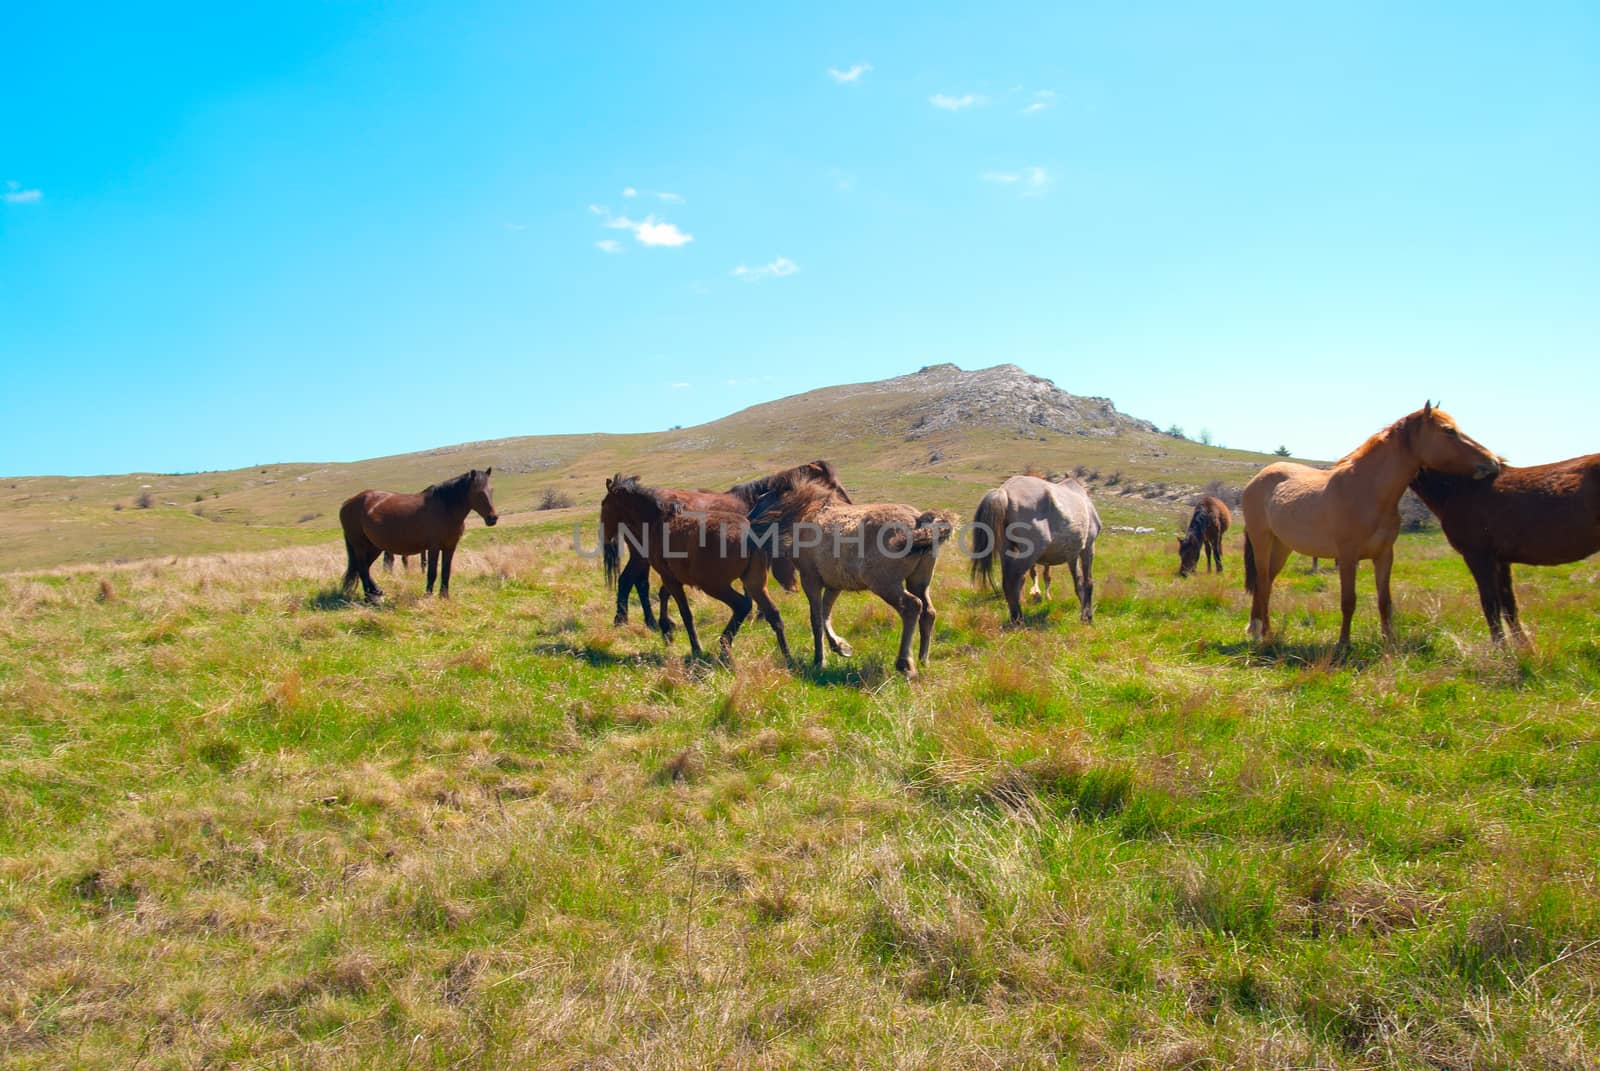 Herd of horses on the field with green grass